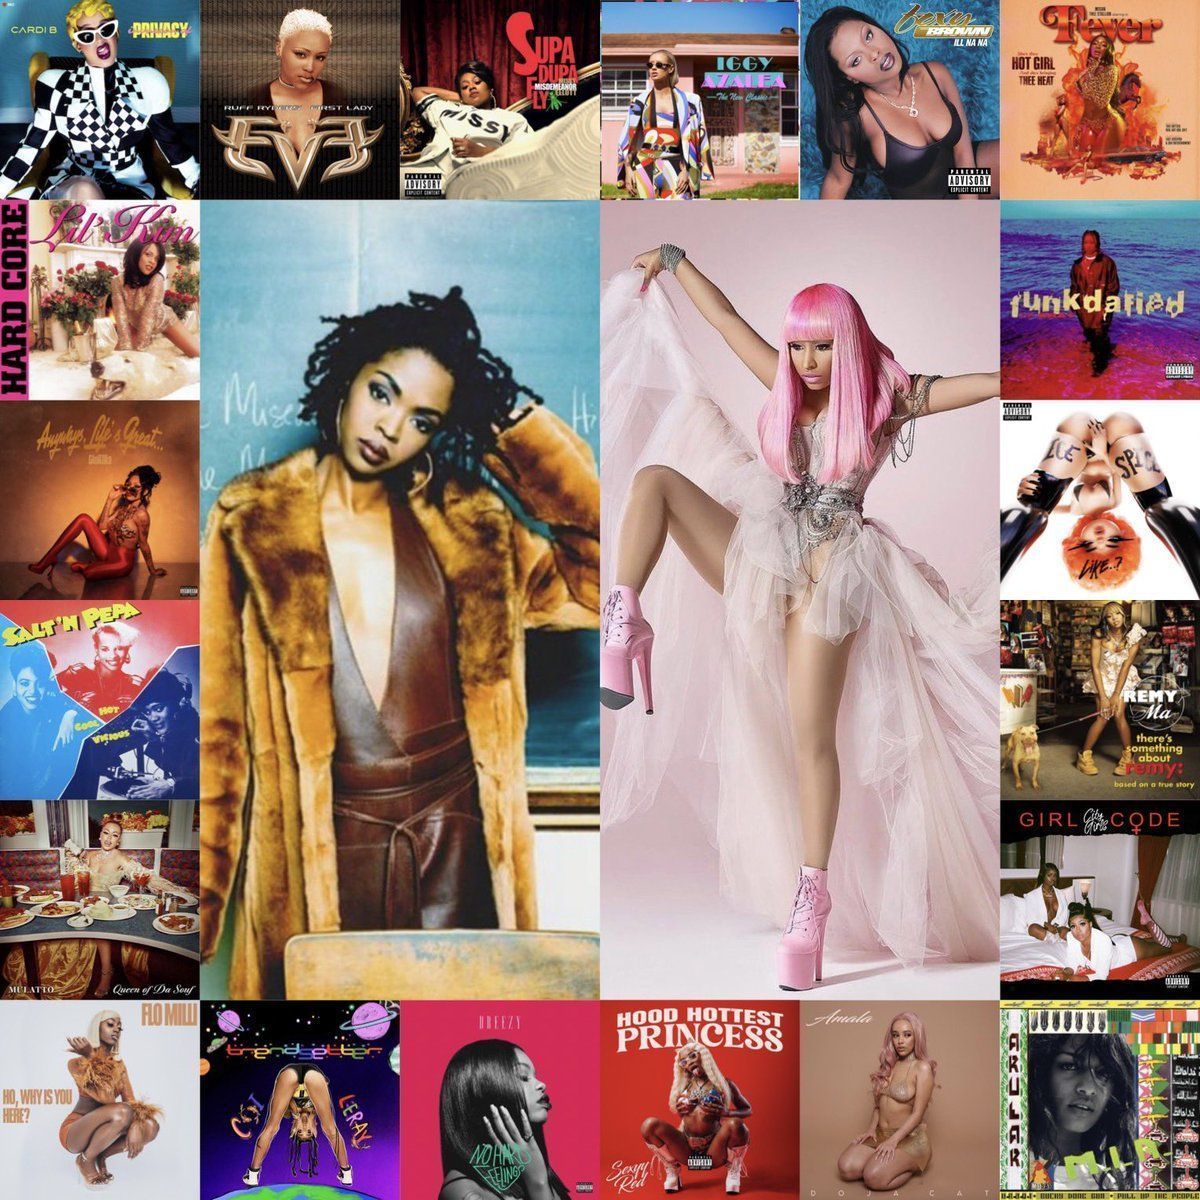 Nicki Minaj's album covers from her first album to her most recent. - Cardi B